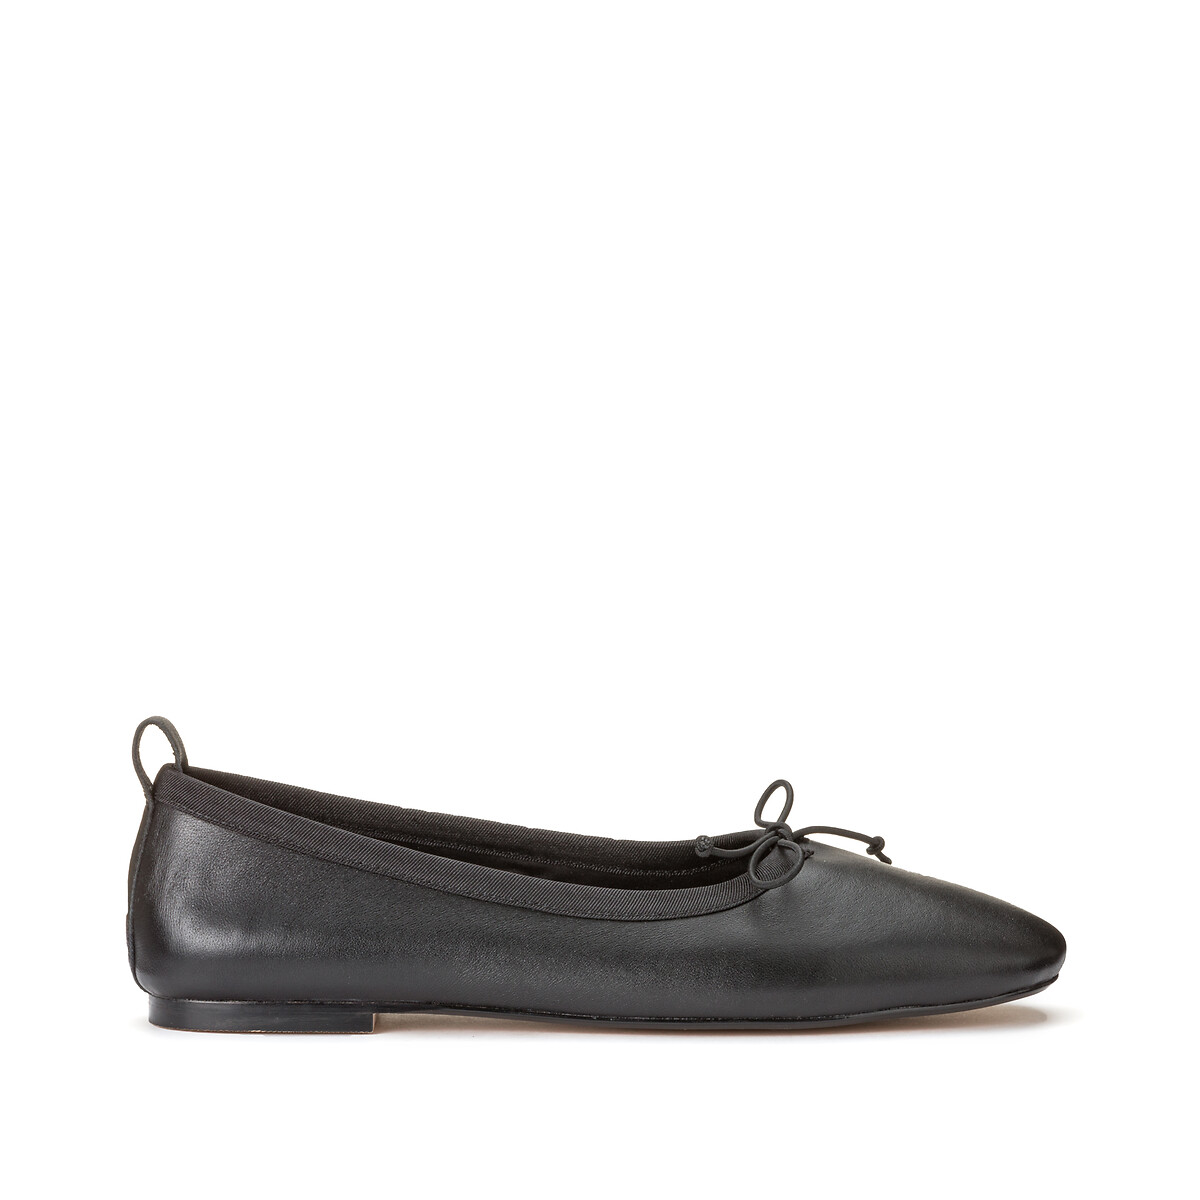 Leather ballet flats with bow detail, black, La Redoute Collections ...